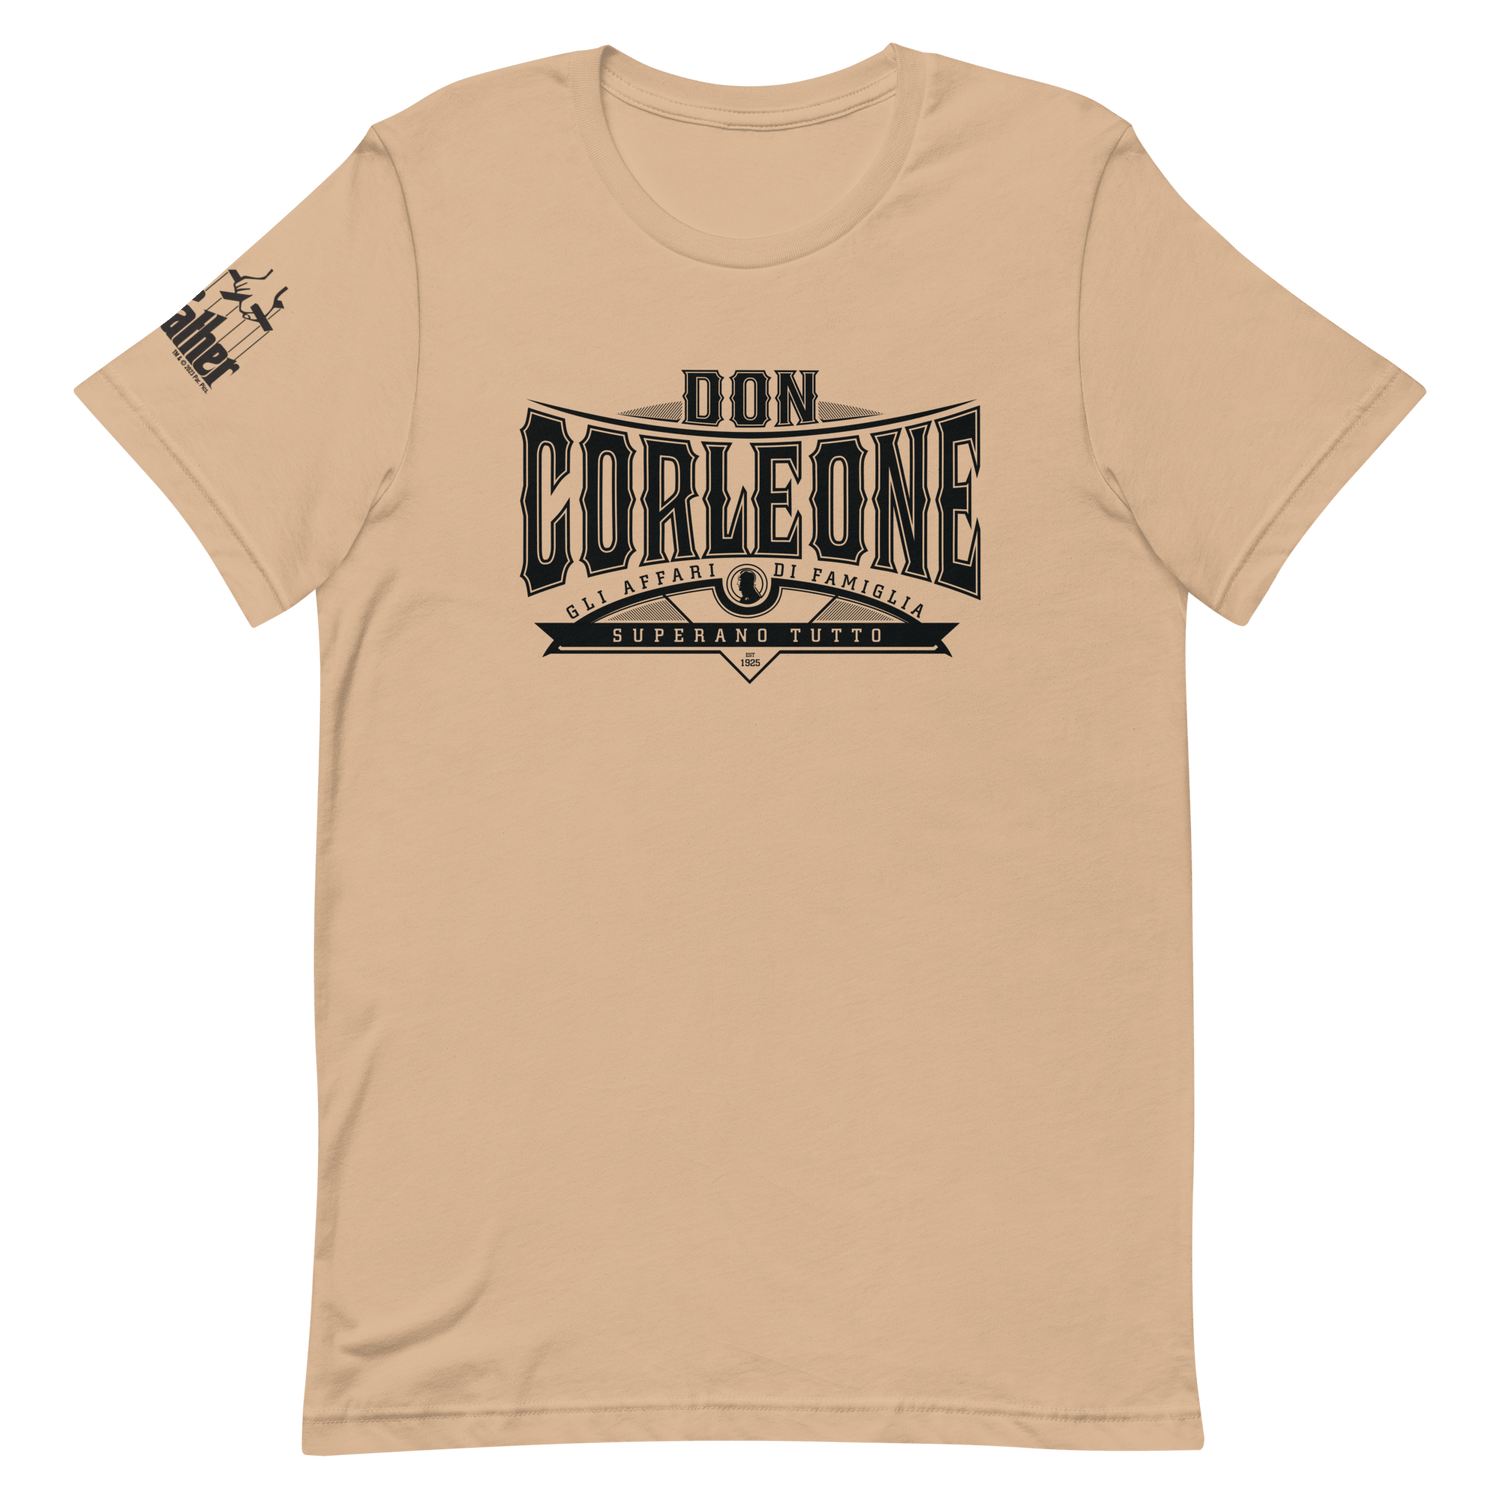 The Godfather Don Corleone Adult Short Sleeve T - Shirt - Paramount Shop